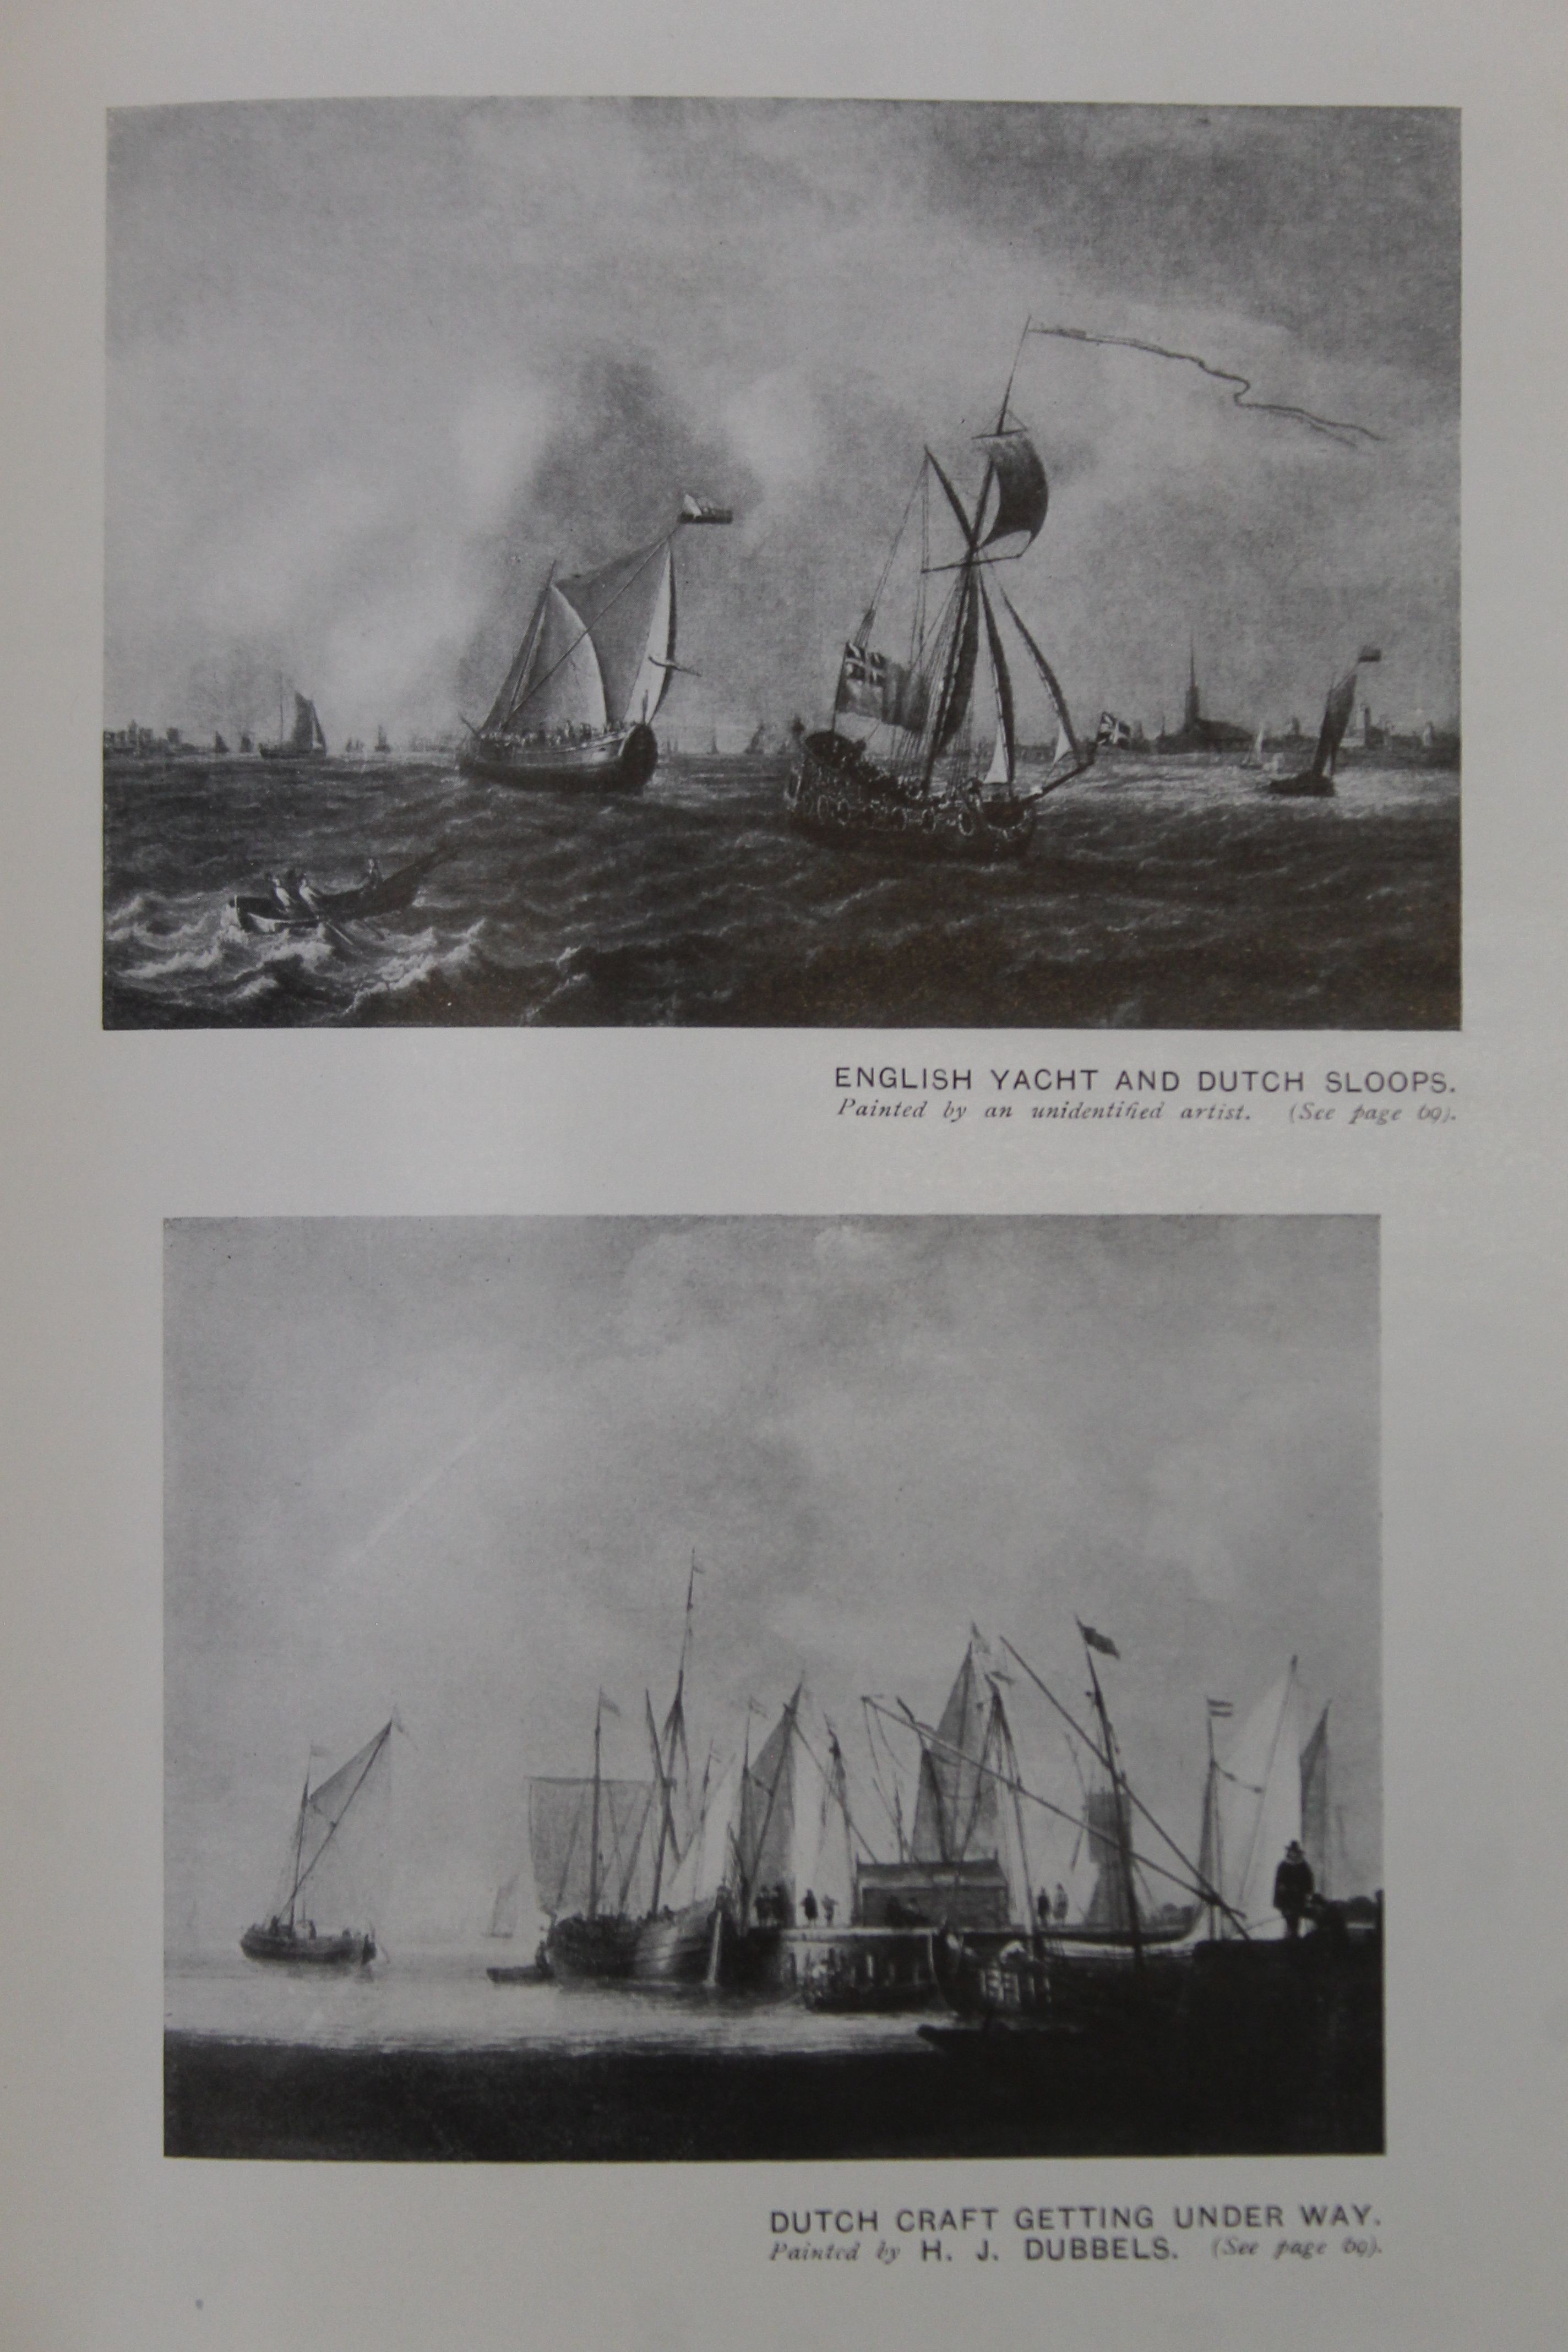 Gavin (C M), Royal Yachts, limited to 100 copies, this copy 43, full morocco, 4to, - Image 18 of 18